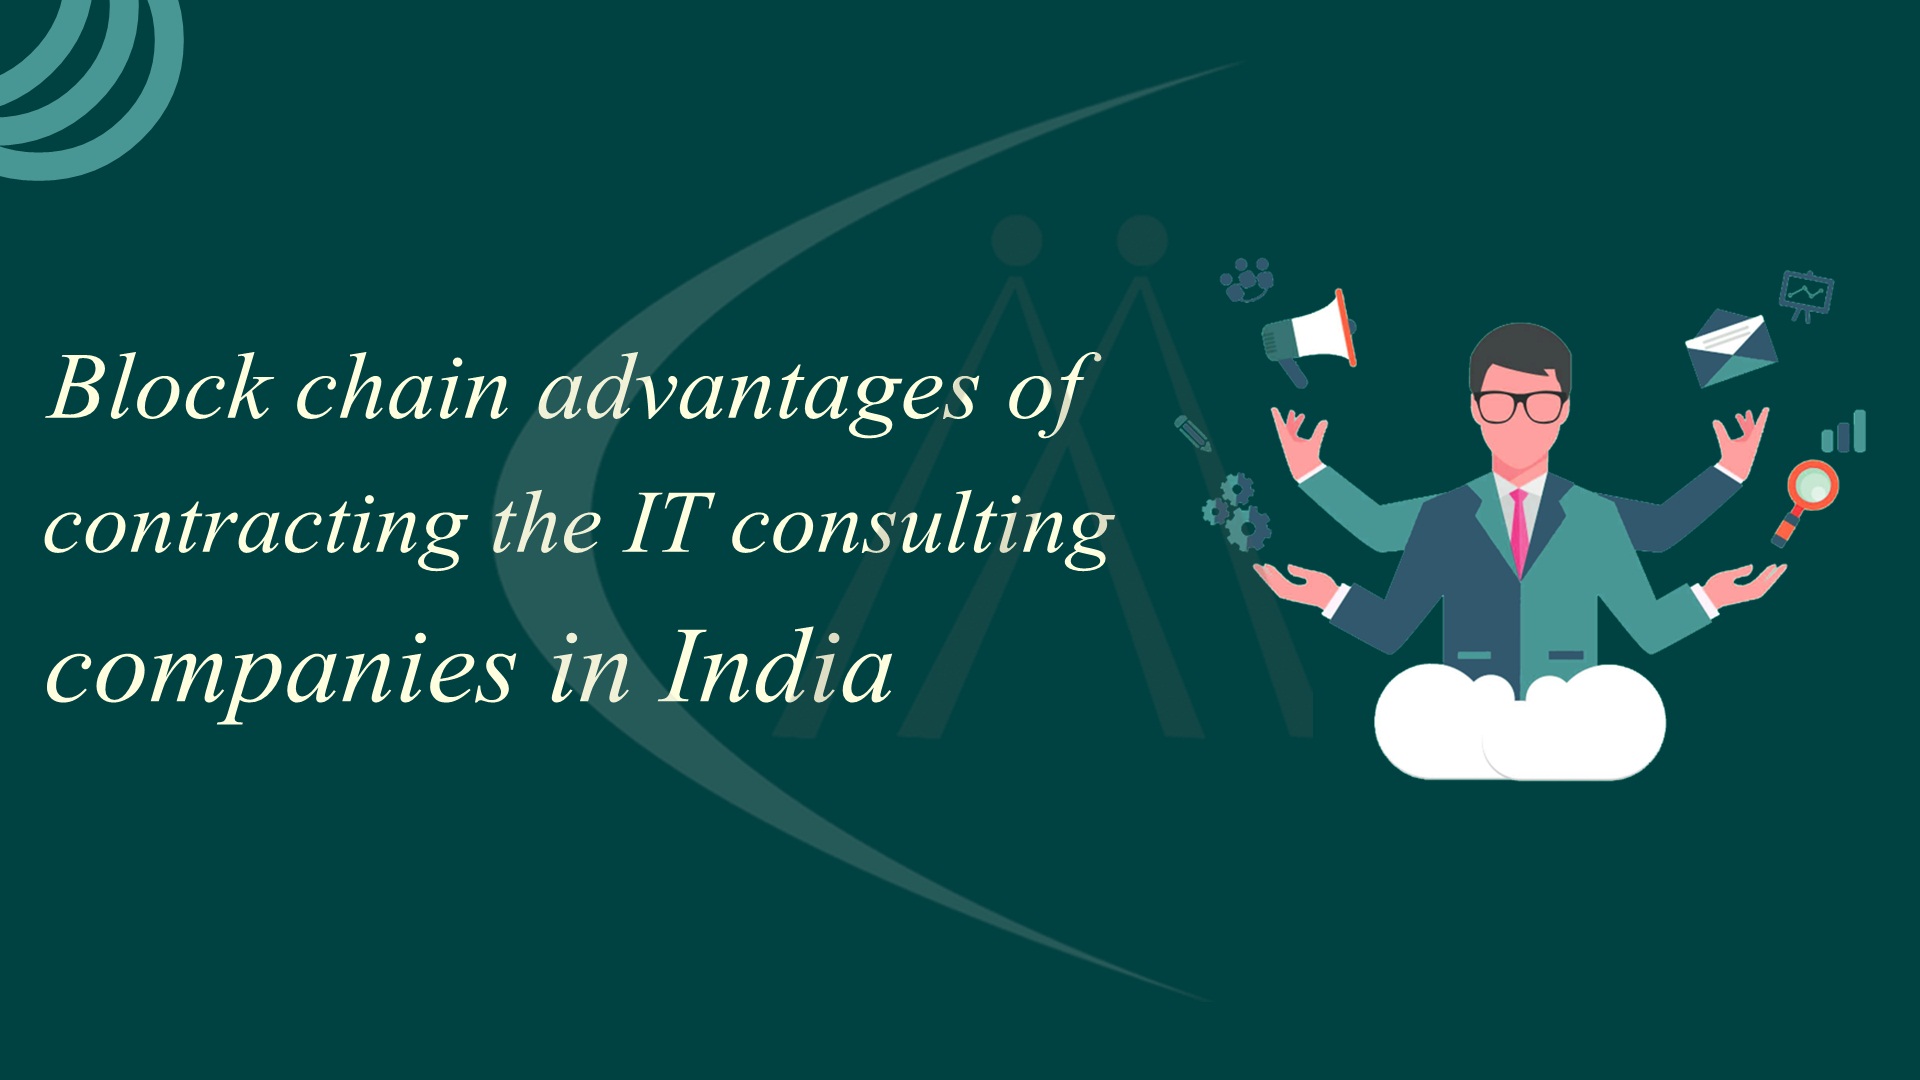 Block chain advantages of contracting the IT consulting companies in India.